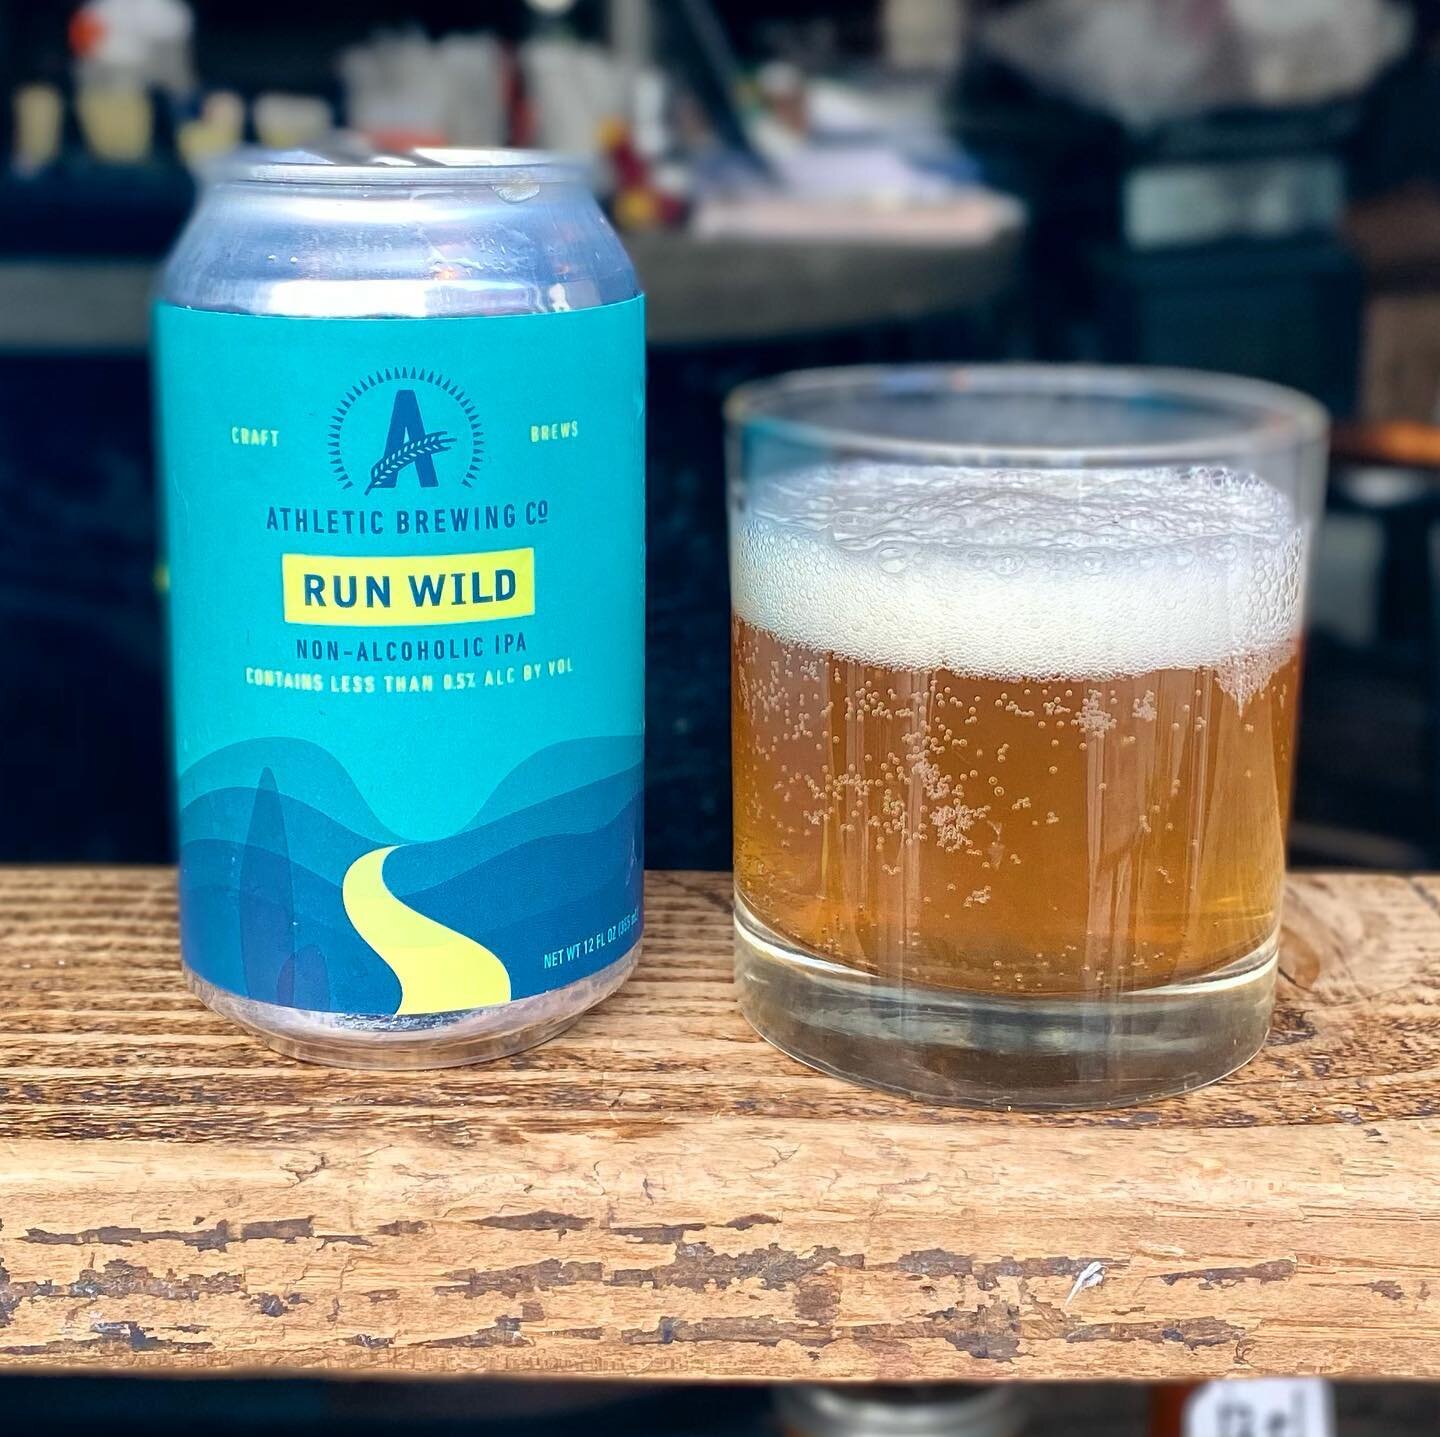 Still going strong with Dry January? We don&rsquo;t know how you&rsquo;ve done it, but we&rsquo;ve got you covered! Try @athleticbrewing Run Wild Non-alcoholic IPA for only $5. 

#athleticbrewingco #brewwithoutcompromise #NAcraftbeer #dryjanuary #eas